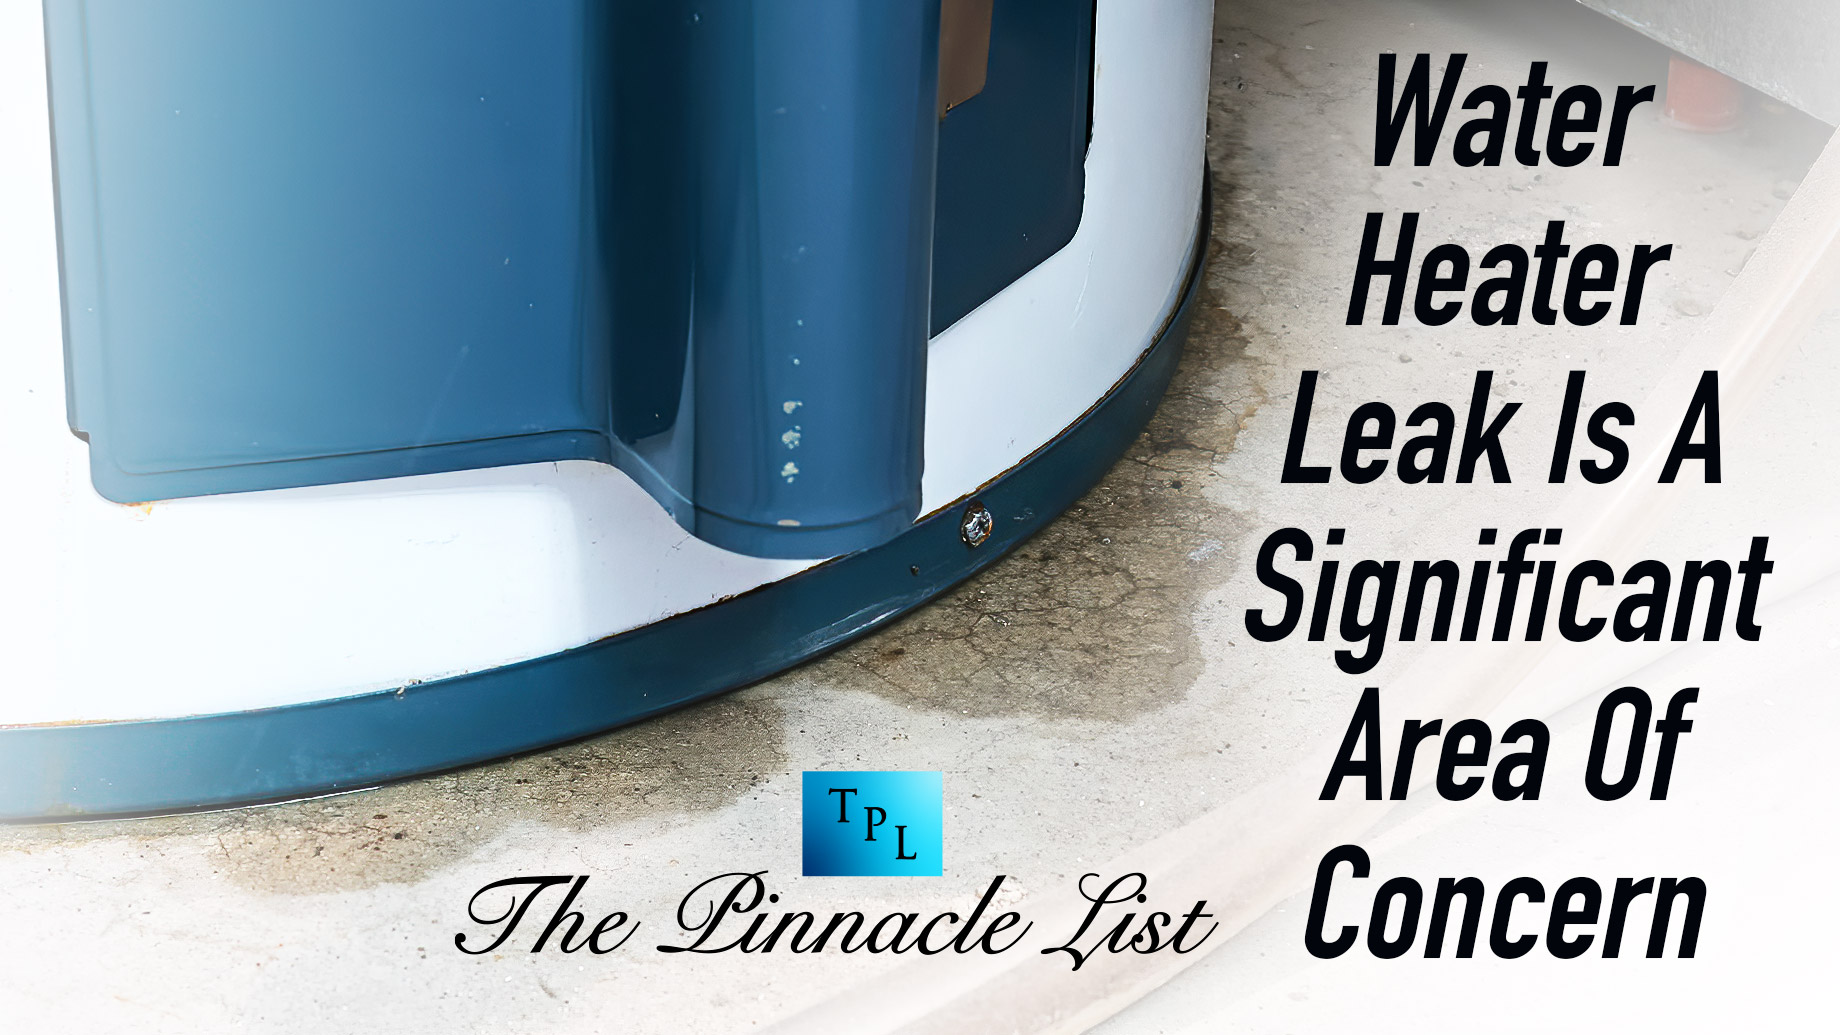 Water Heater Leak Is A Significant Area Of Concern